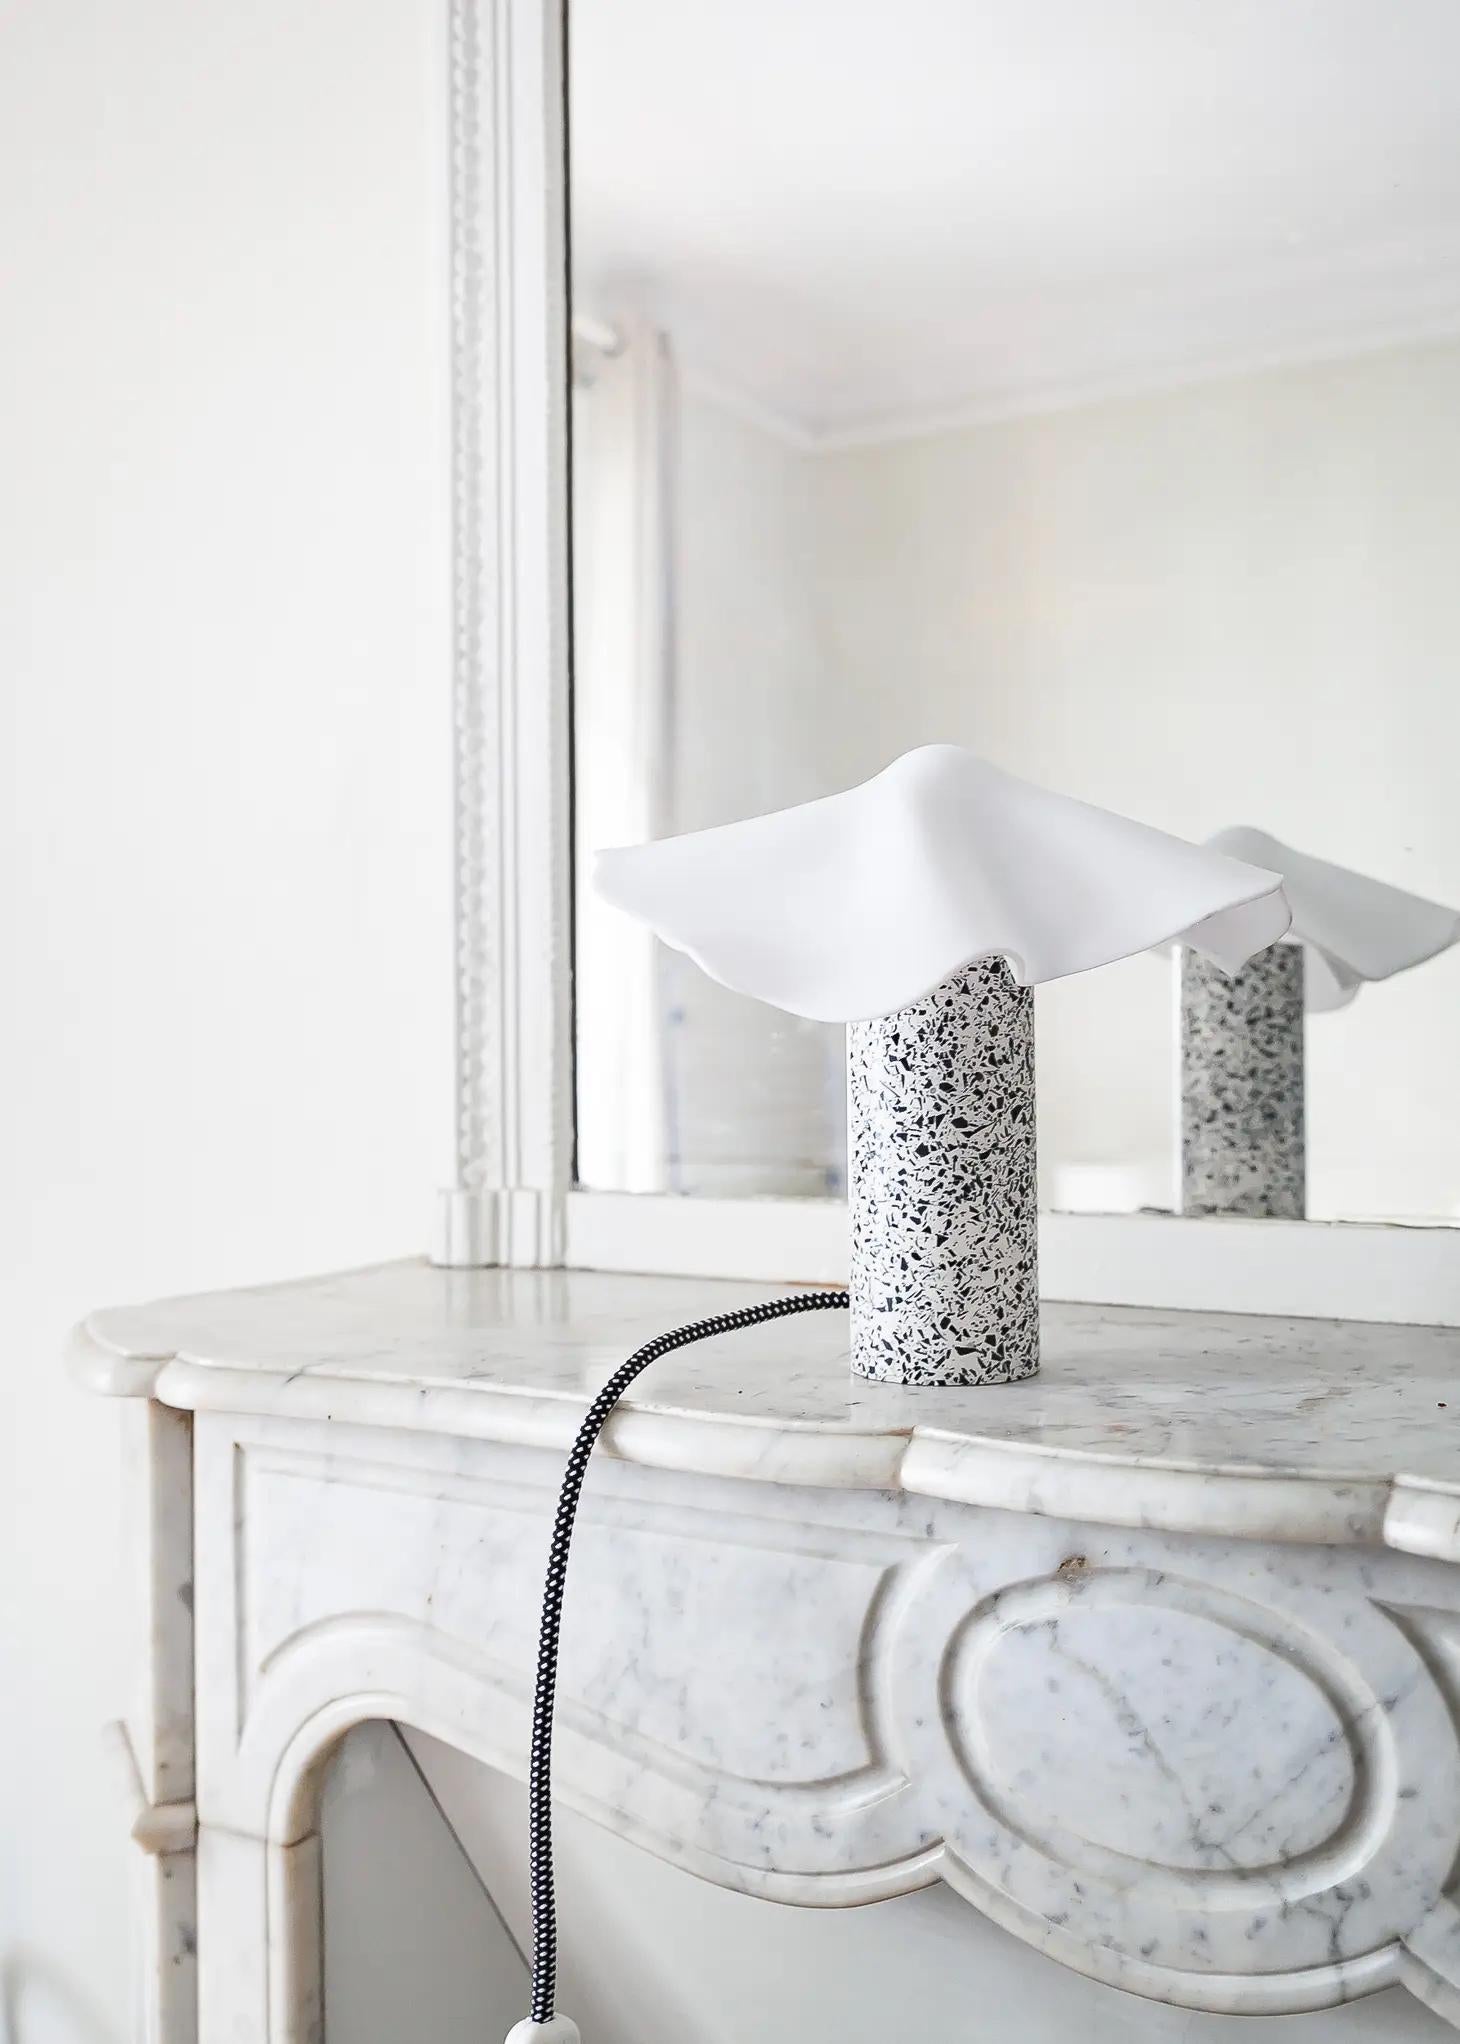 By Moodlight Studio

Table lamp with an astral aspect, spin-it hypnotizes thanks to its lampshade with airy curves. Simply balanced on the Led bulb, it twirls to the touch and makes the light dance on the walls.

Recycled Plastic:
Its terrazzo base